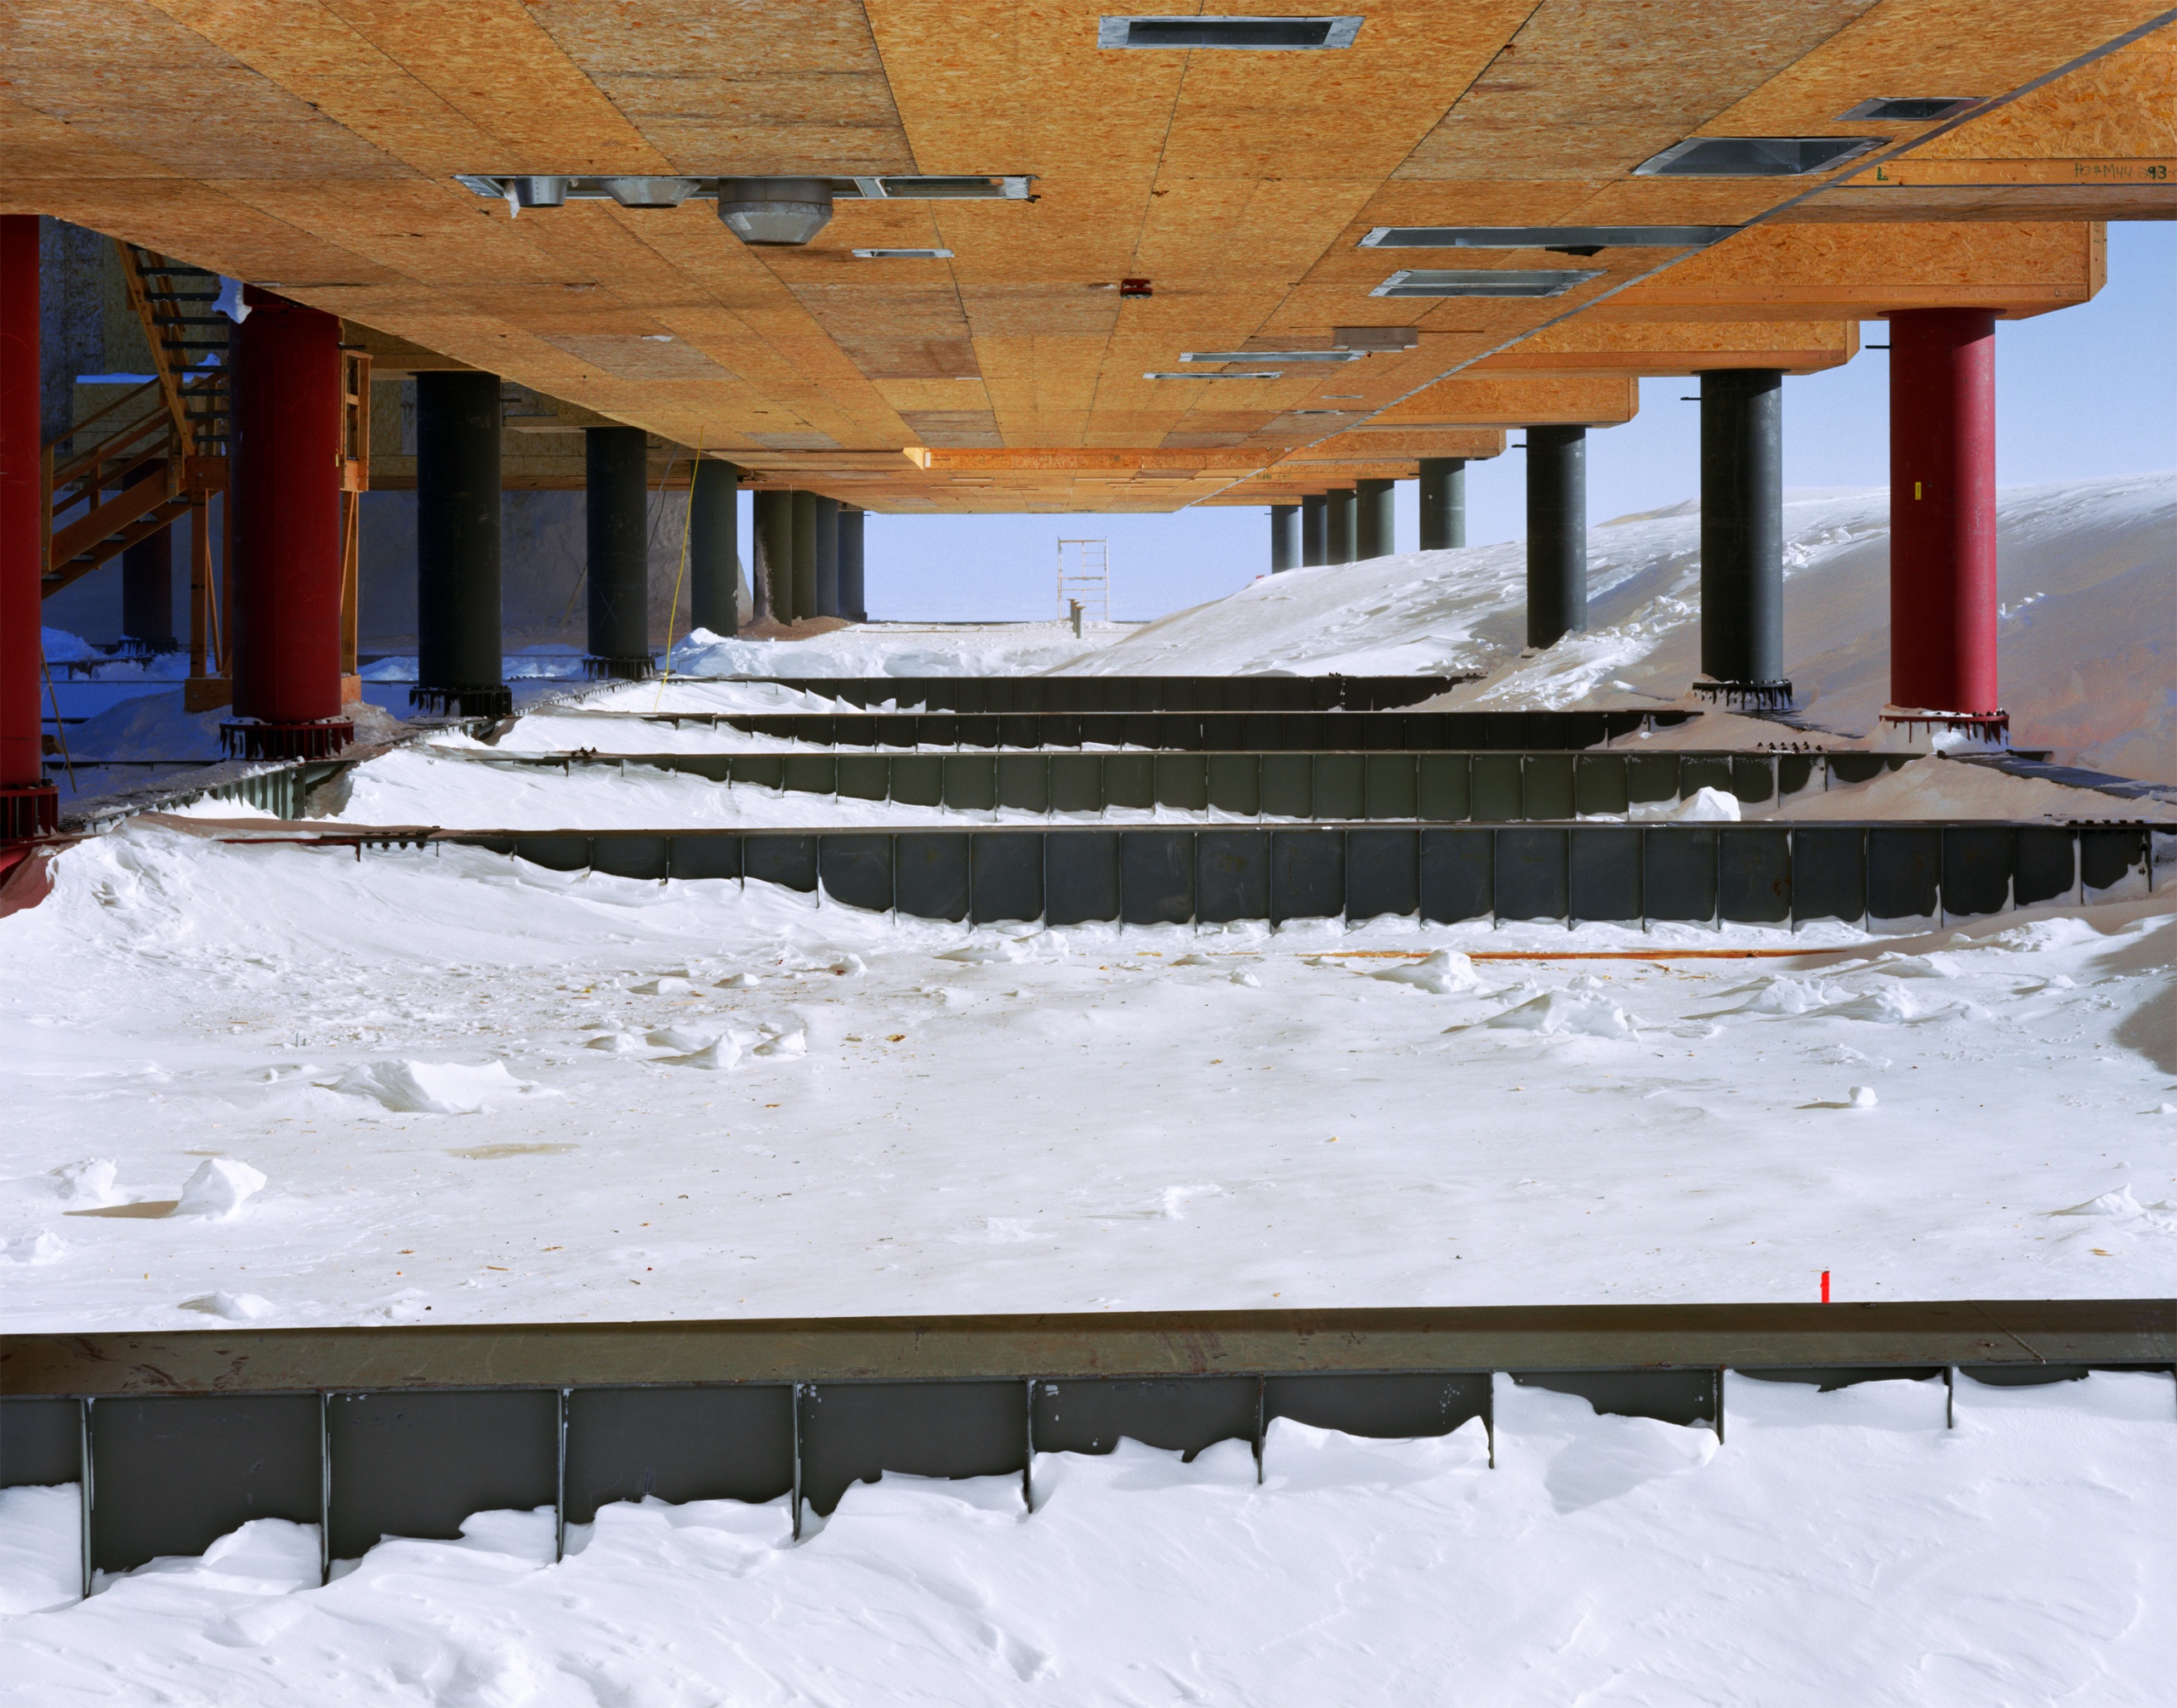 Photograph of the anonymous industrial building located in the US base at the South Pole is part of a triptych